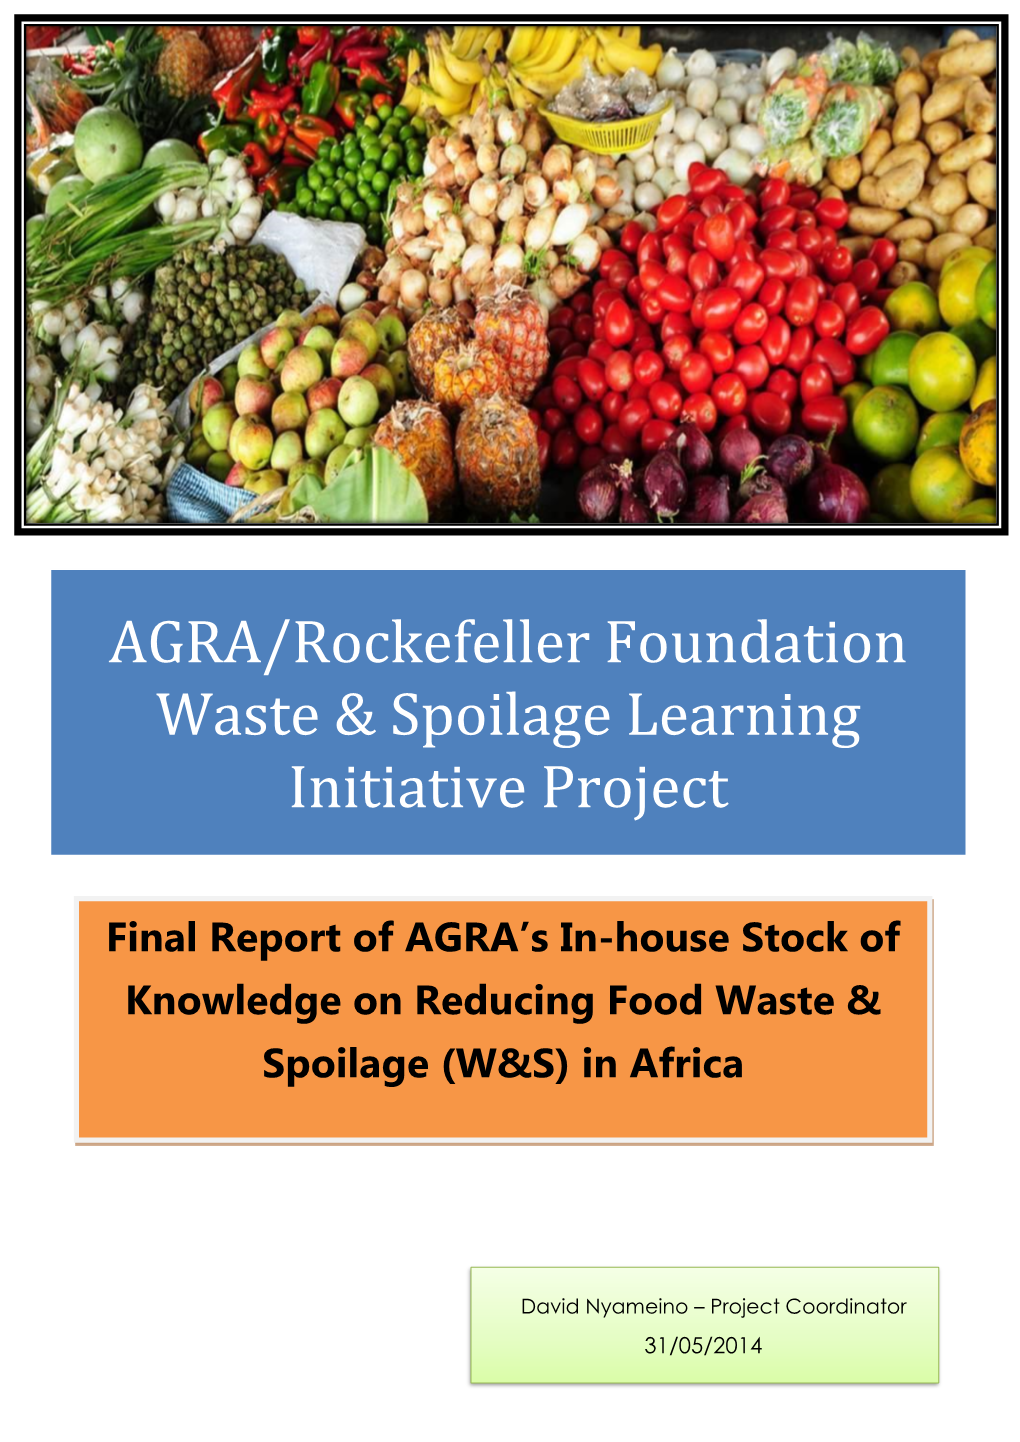 AGRA/Rockefeller Foundation Waste & Spoilage Learning Initiative Project